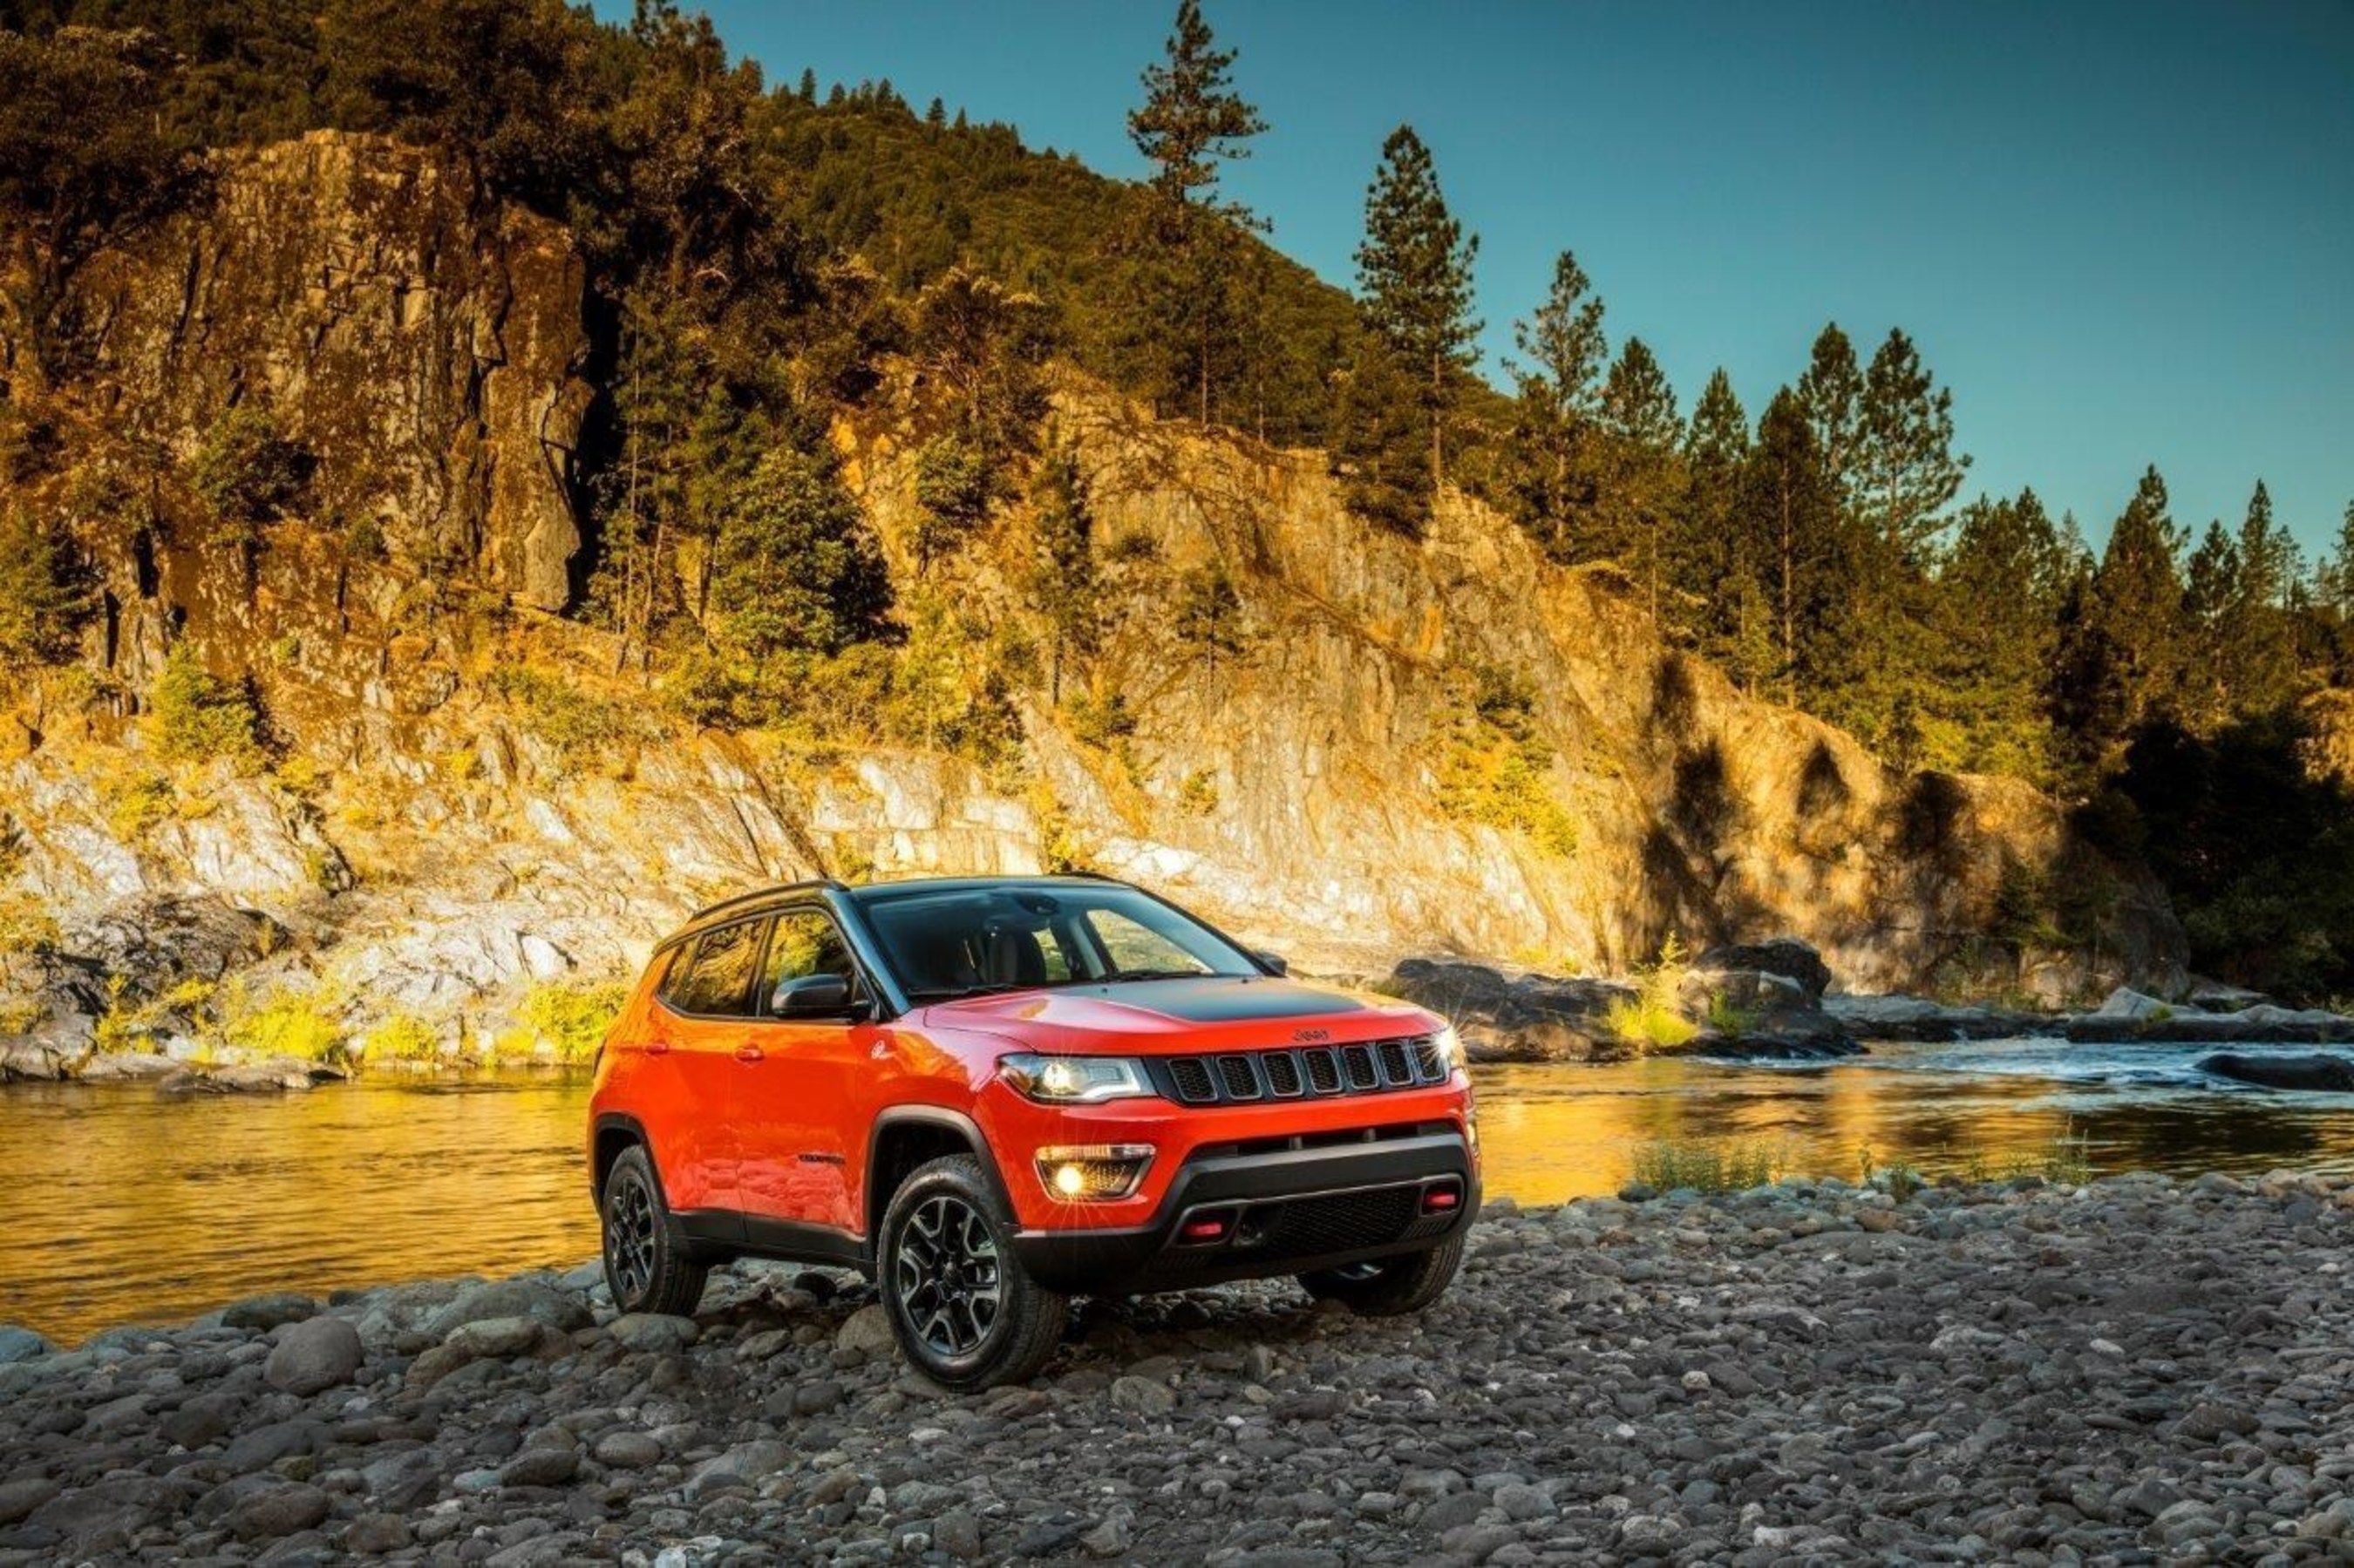 The all-new 2017 Jeep(R) Compass made its North American debut today at the 2016 Los Angeles Auto Show. Compass expands the Jeep brand's global vehicle reach with a world-class compact SUV that enters a growing segment worldwide delivering legendary benchmark capability. Built in four countries - with 17 powertrain combinations -  it will be available for markets all around the world.